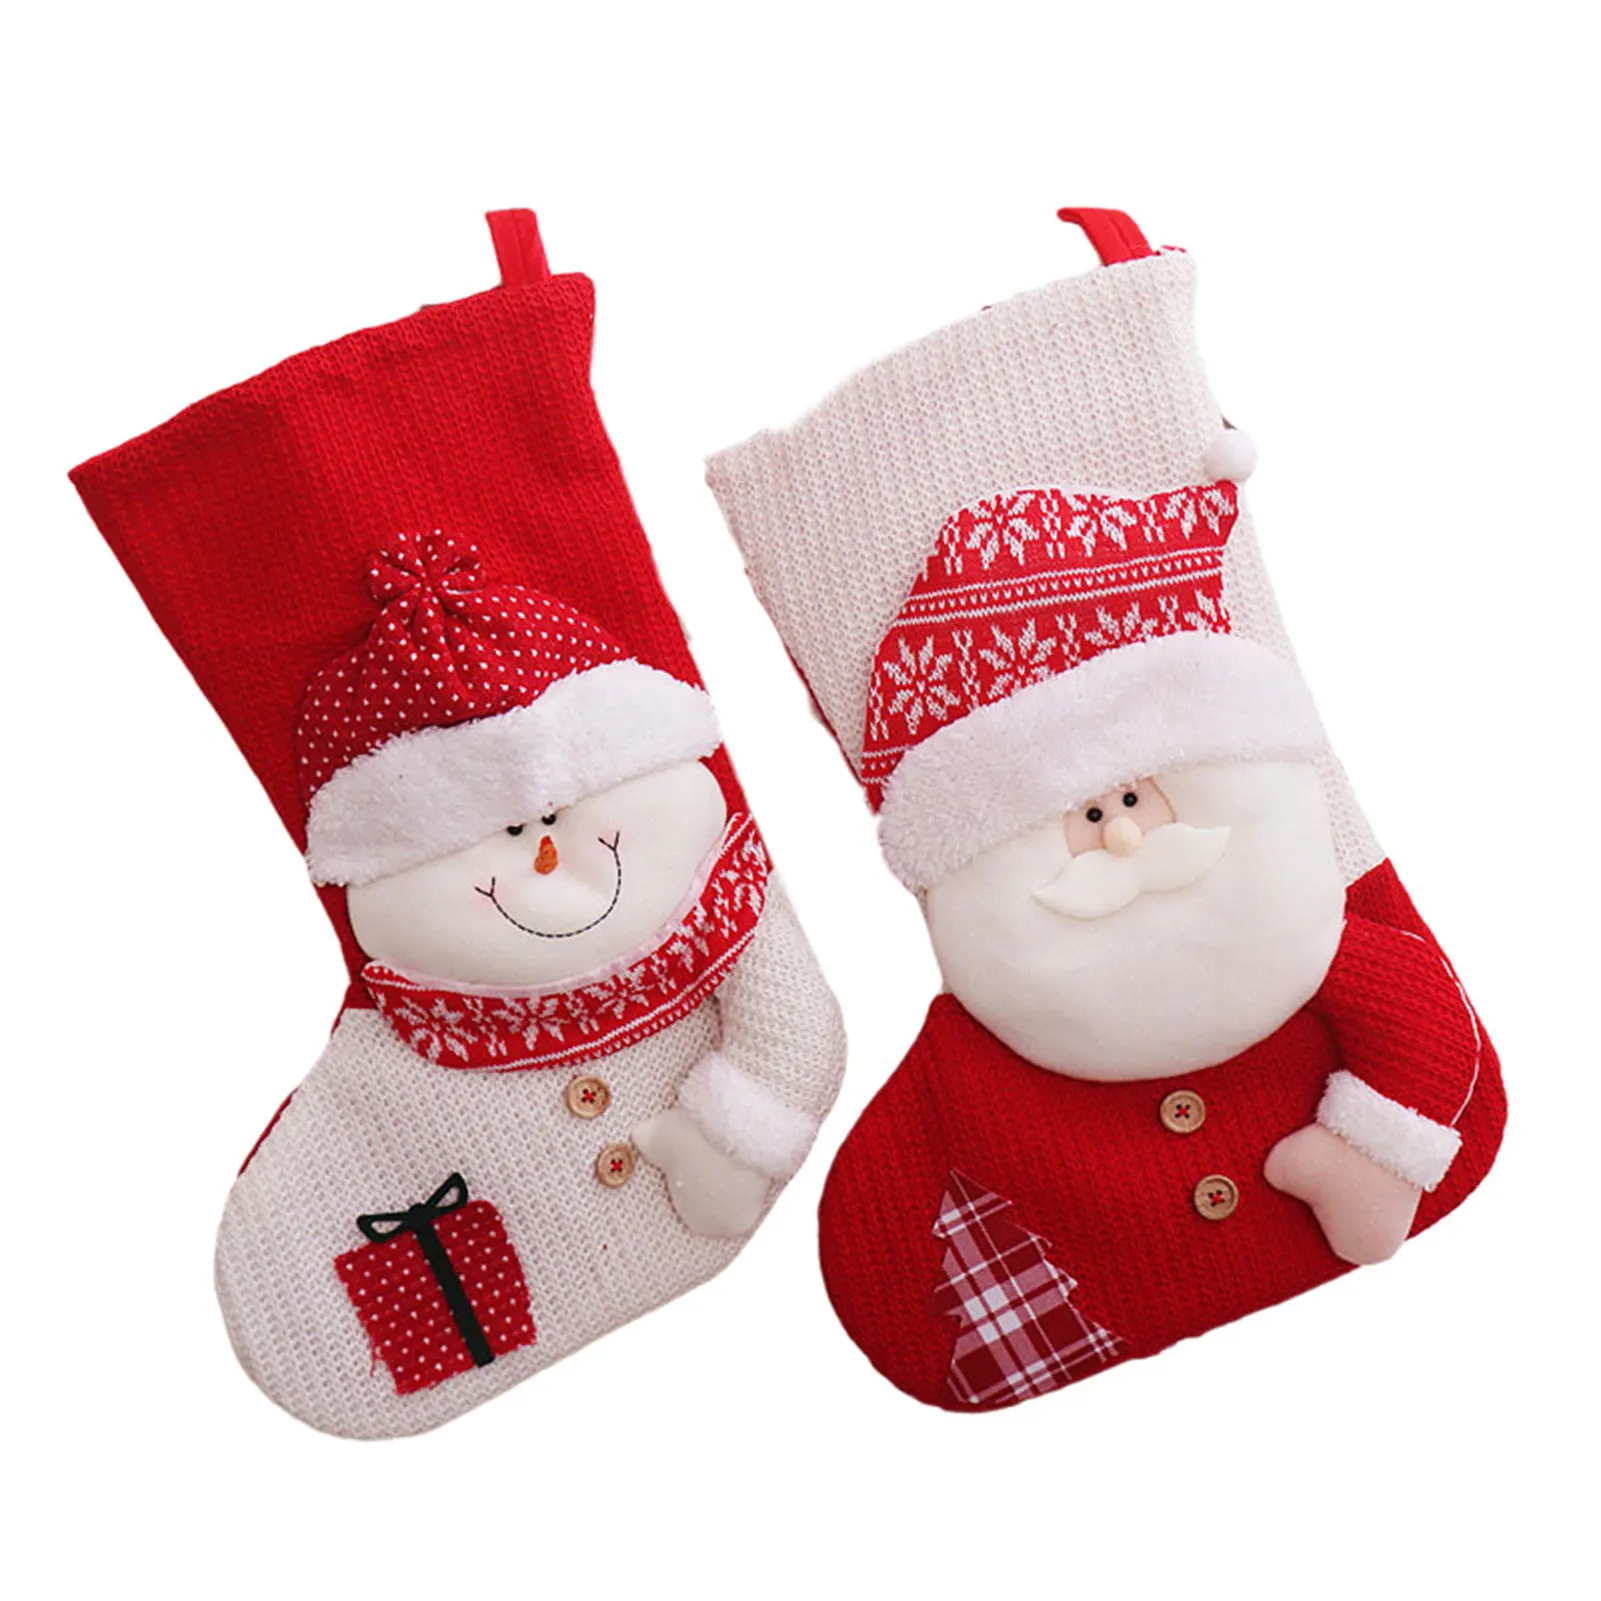 

Christmas Stocking Gift Holder Multi Purpose Stockings Preparing Gifts for Friends Families